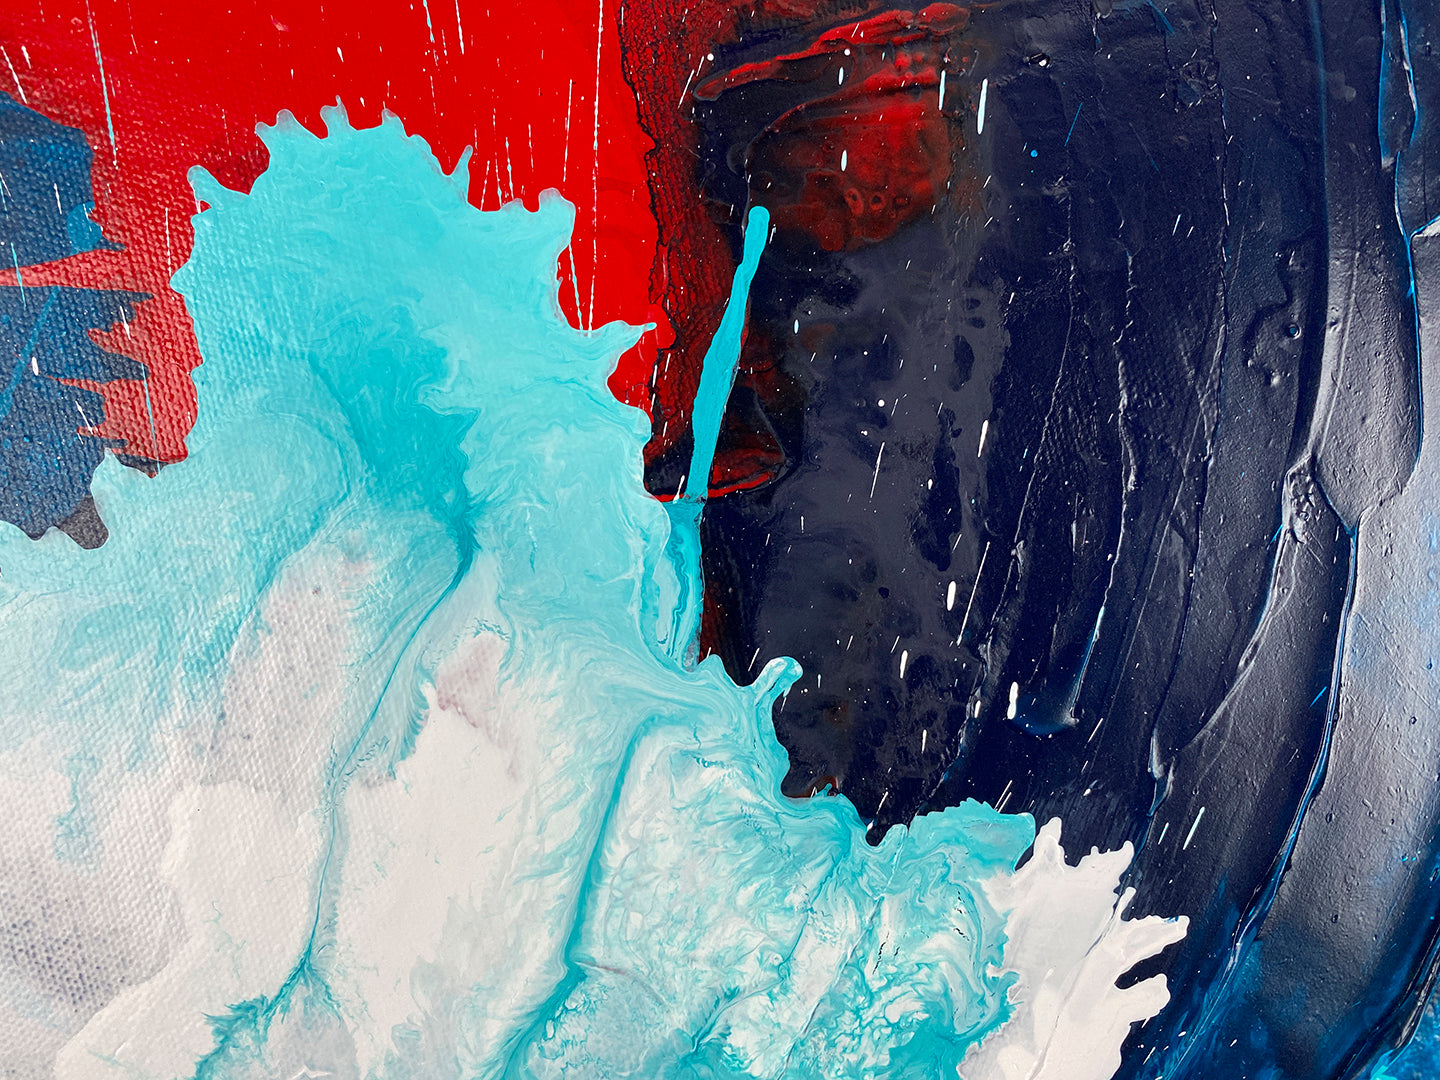 Abstract, expressionism, acrylic painting close-up 4. Overlapping explosions of dark blue, turquoise, bright red and white